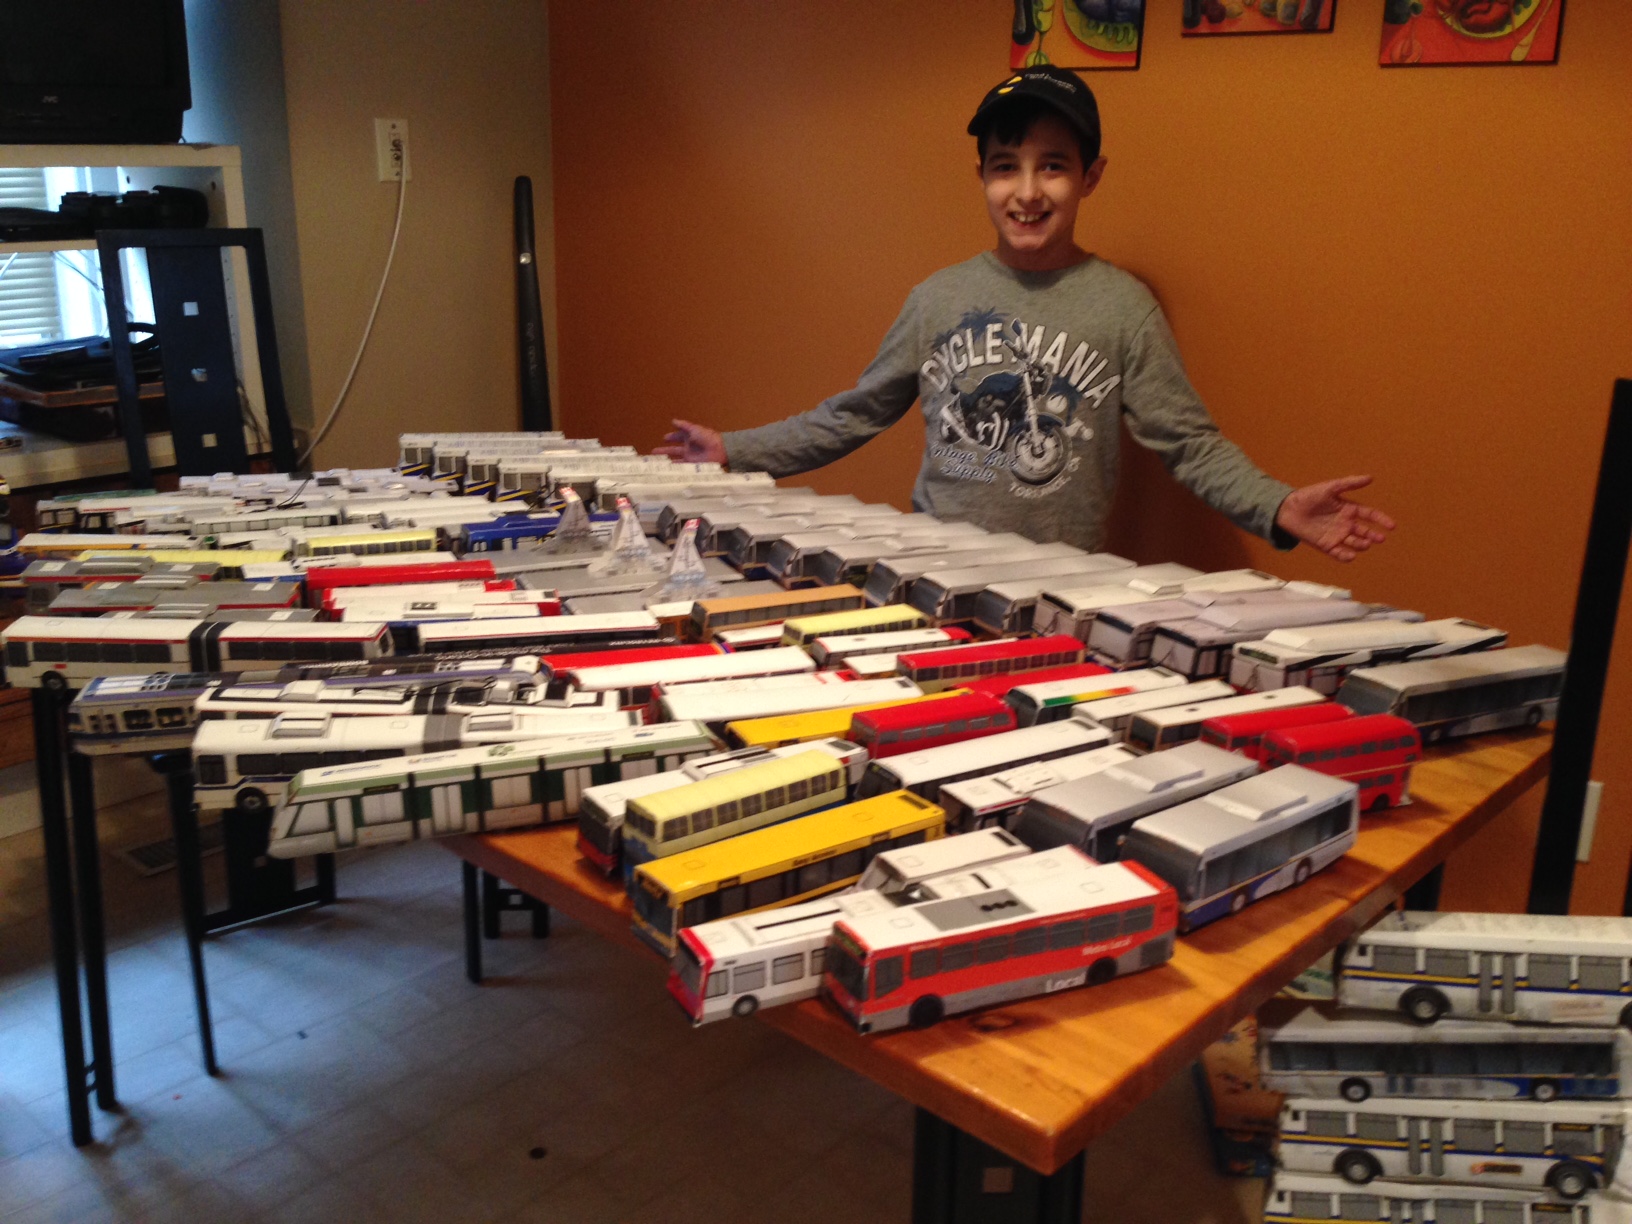 Trevor showed us his collection of transit vehicles!